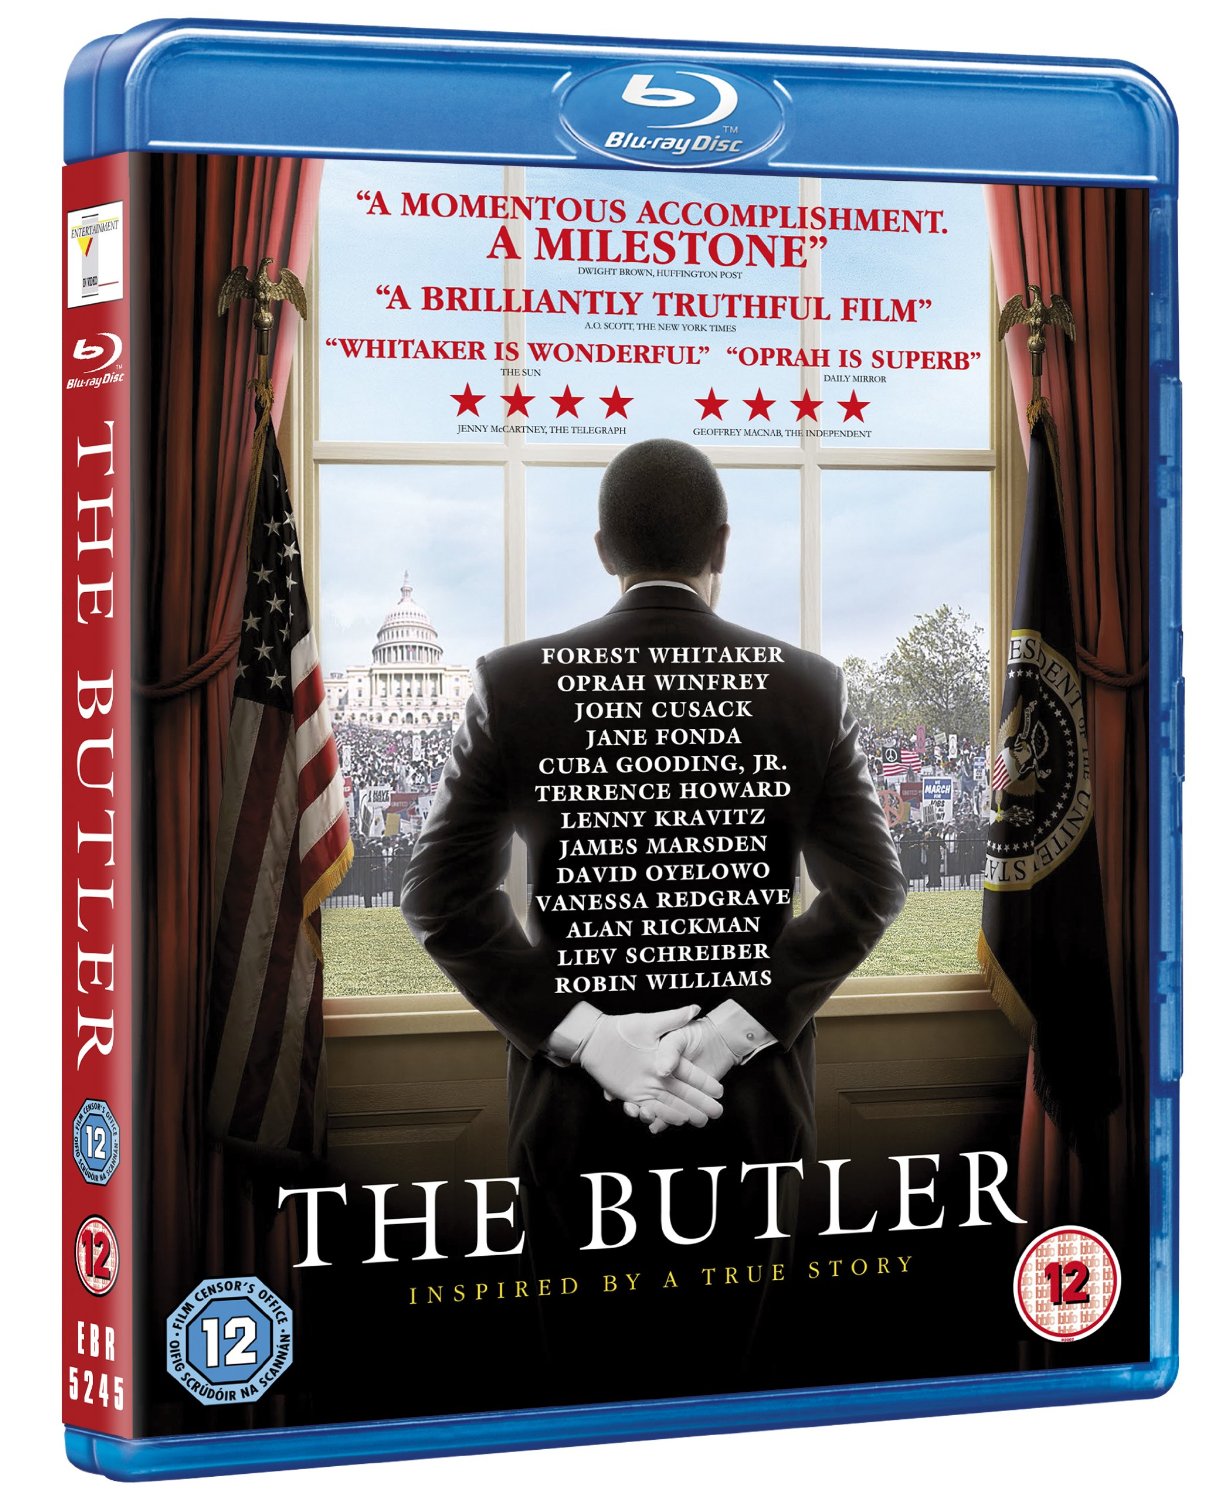 boom competitions - win a copy of The Butler on Blu-ray